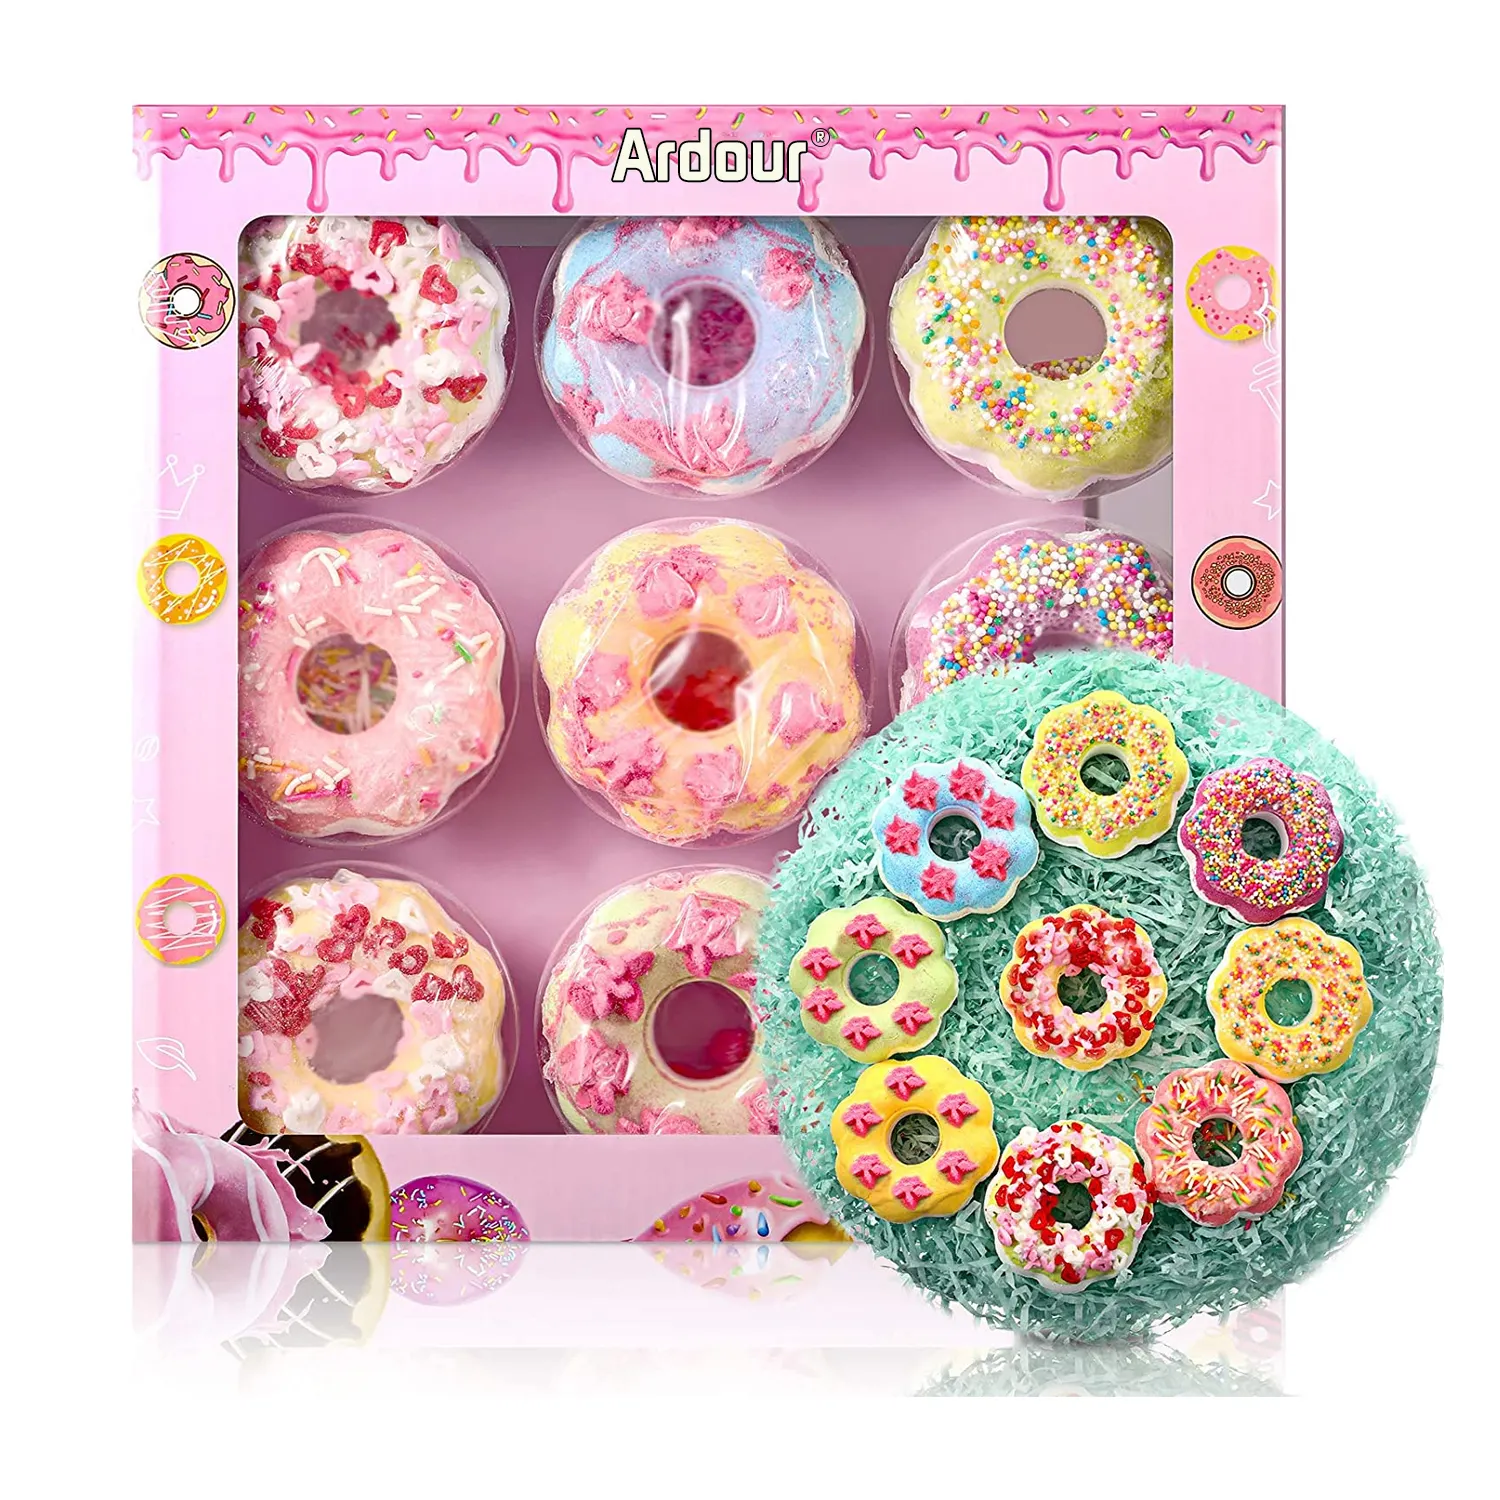 Shower ball set doughnut shower ball is suitable for giving gifts rich in essential oil bath salt ball